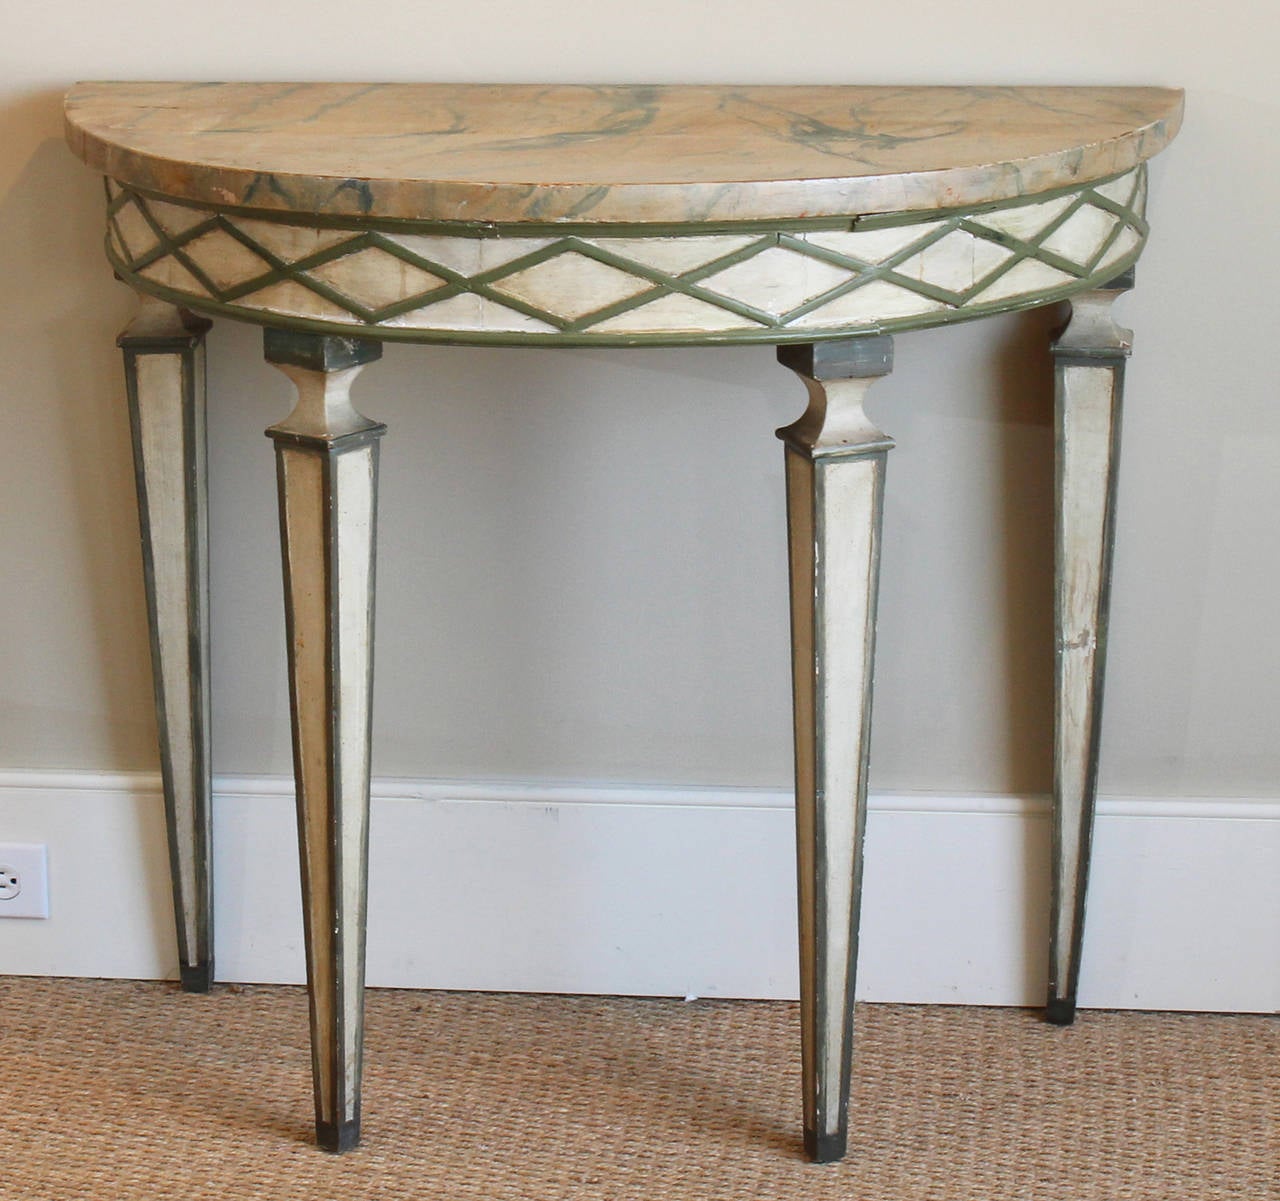 A charming early 20th century Italian faux marble and paint decorated demi-lune console table.